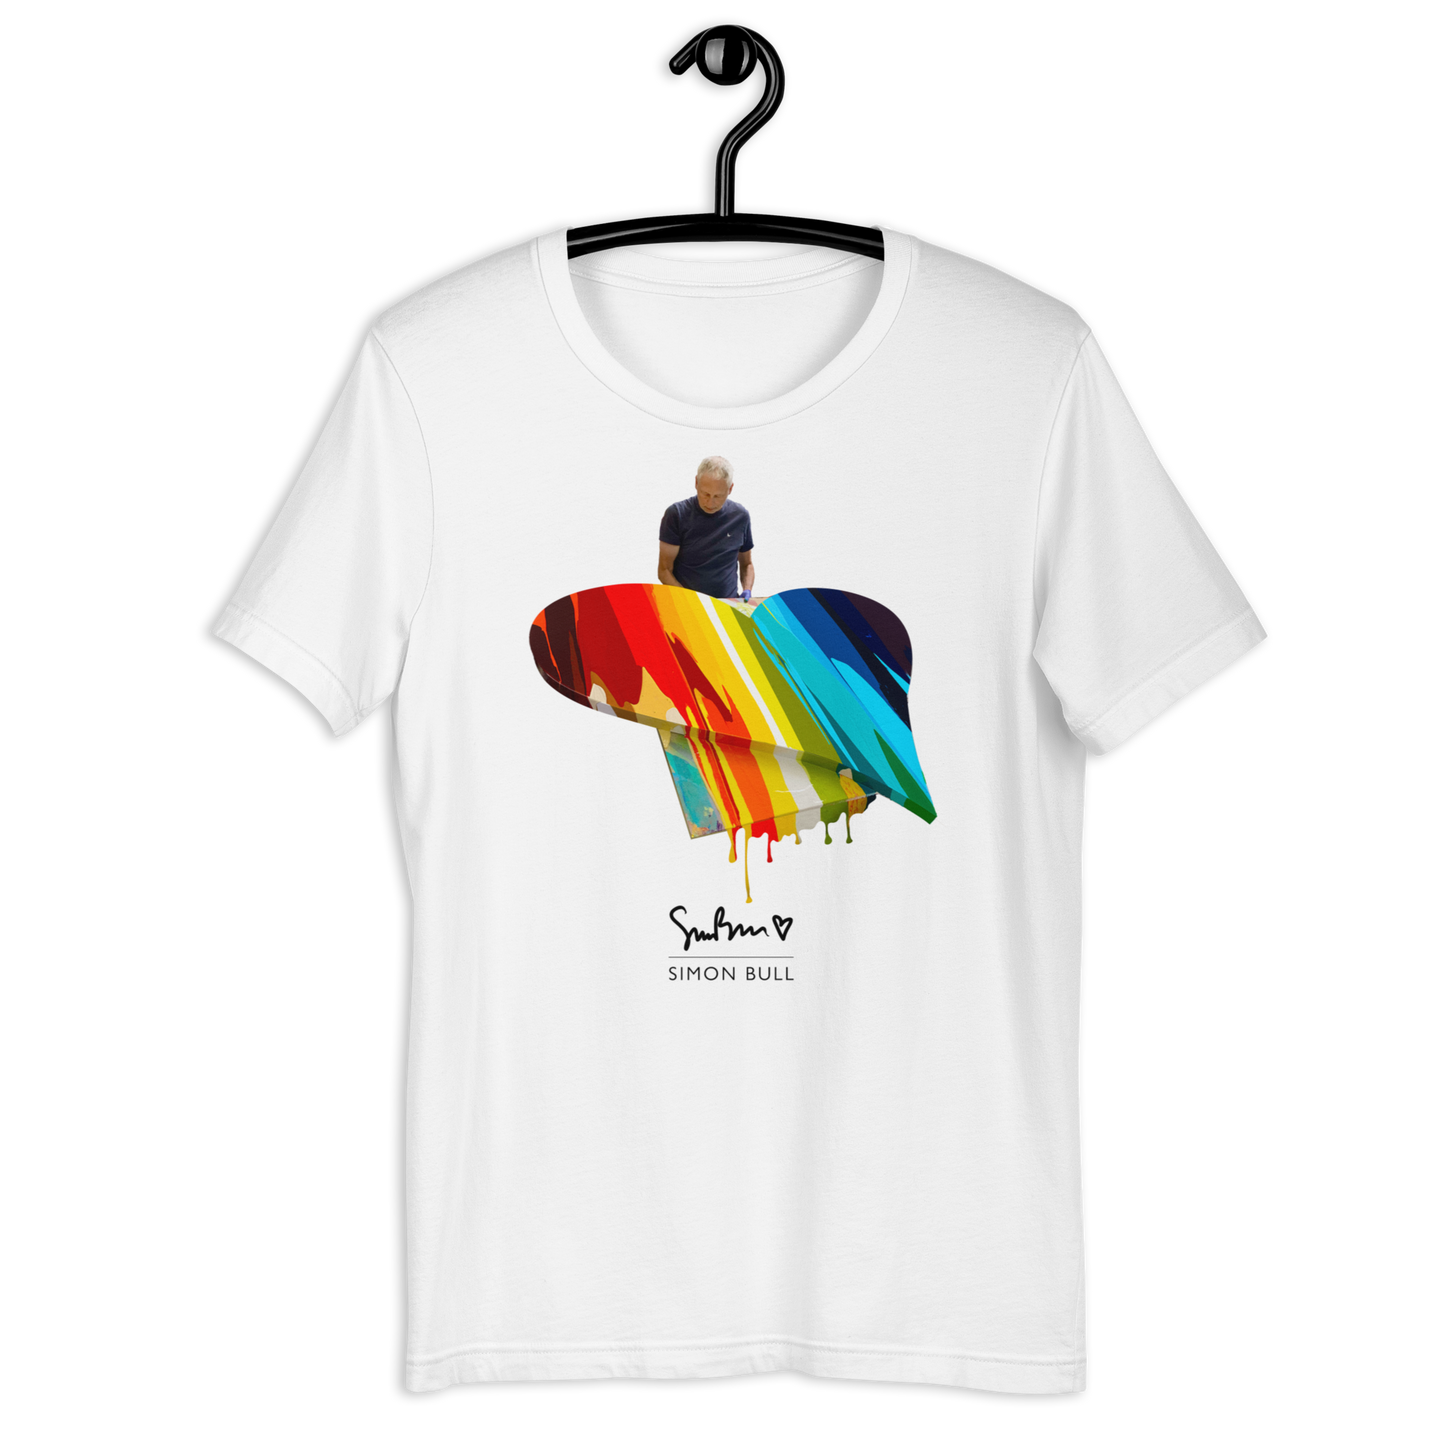 Life is Just a Dream - T-shirt